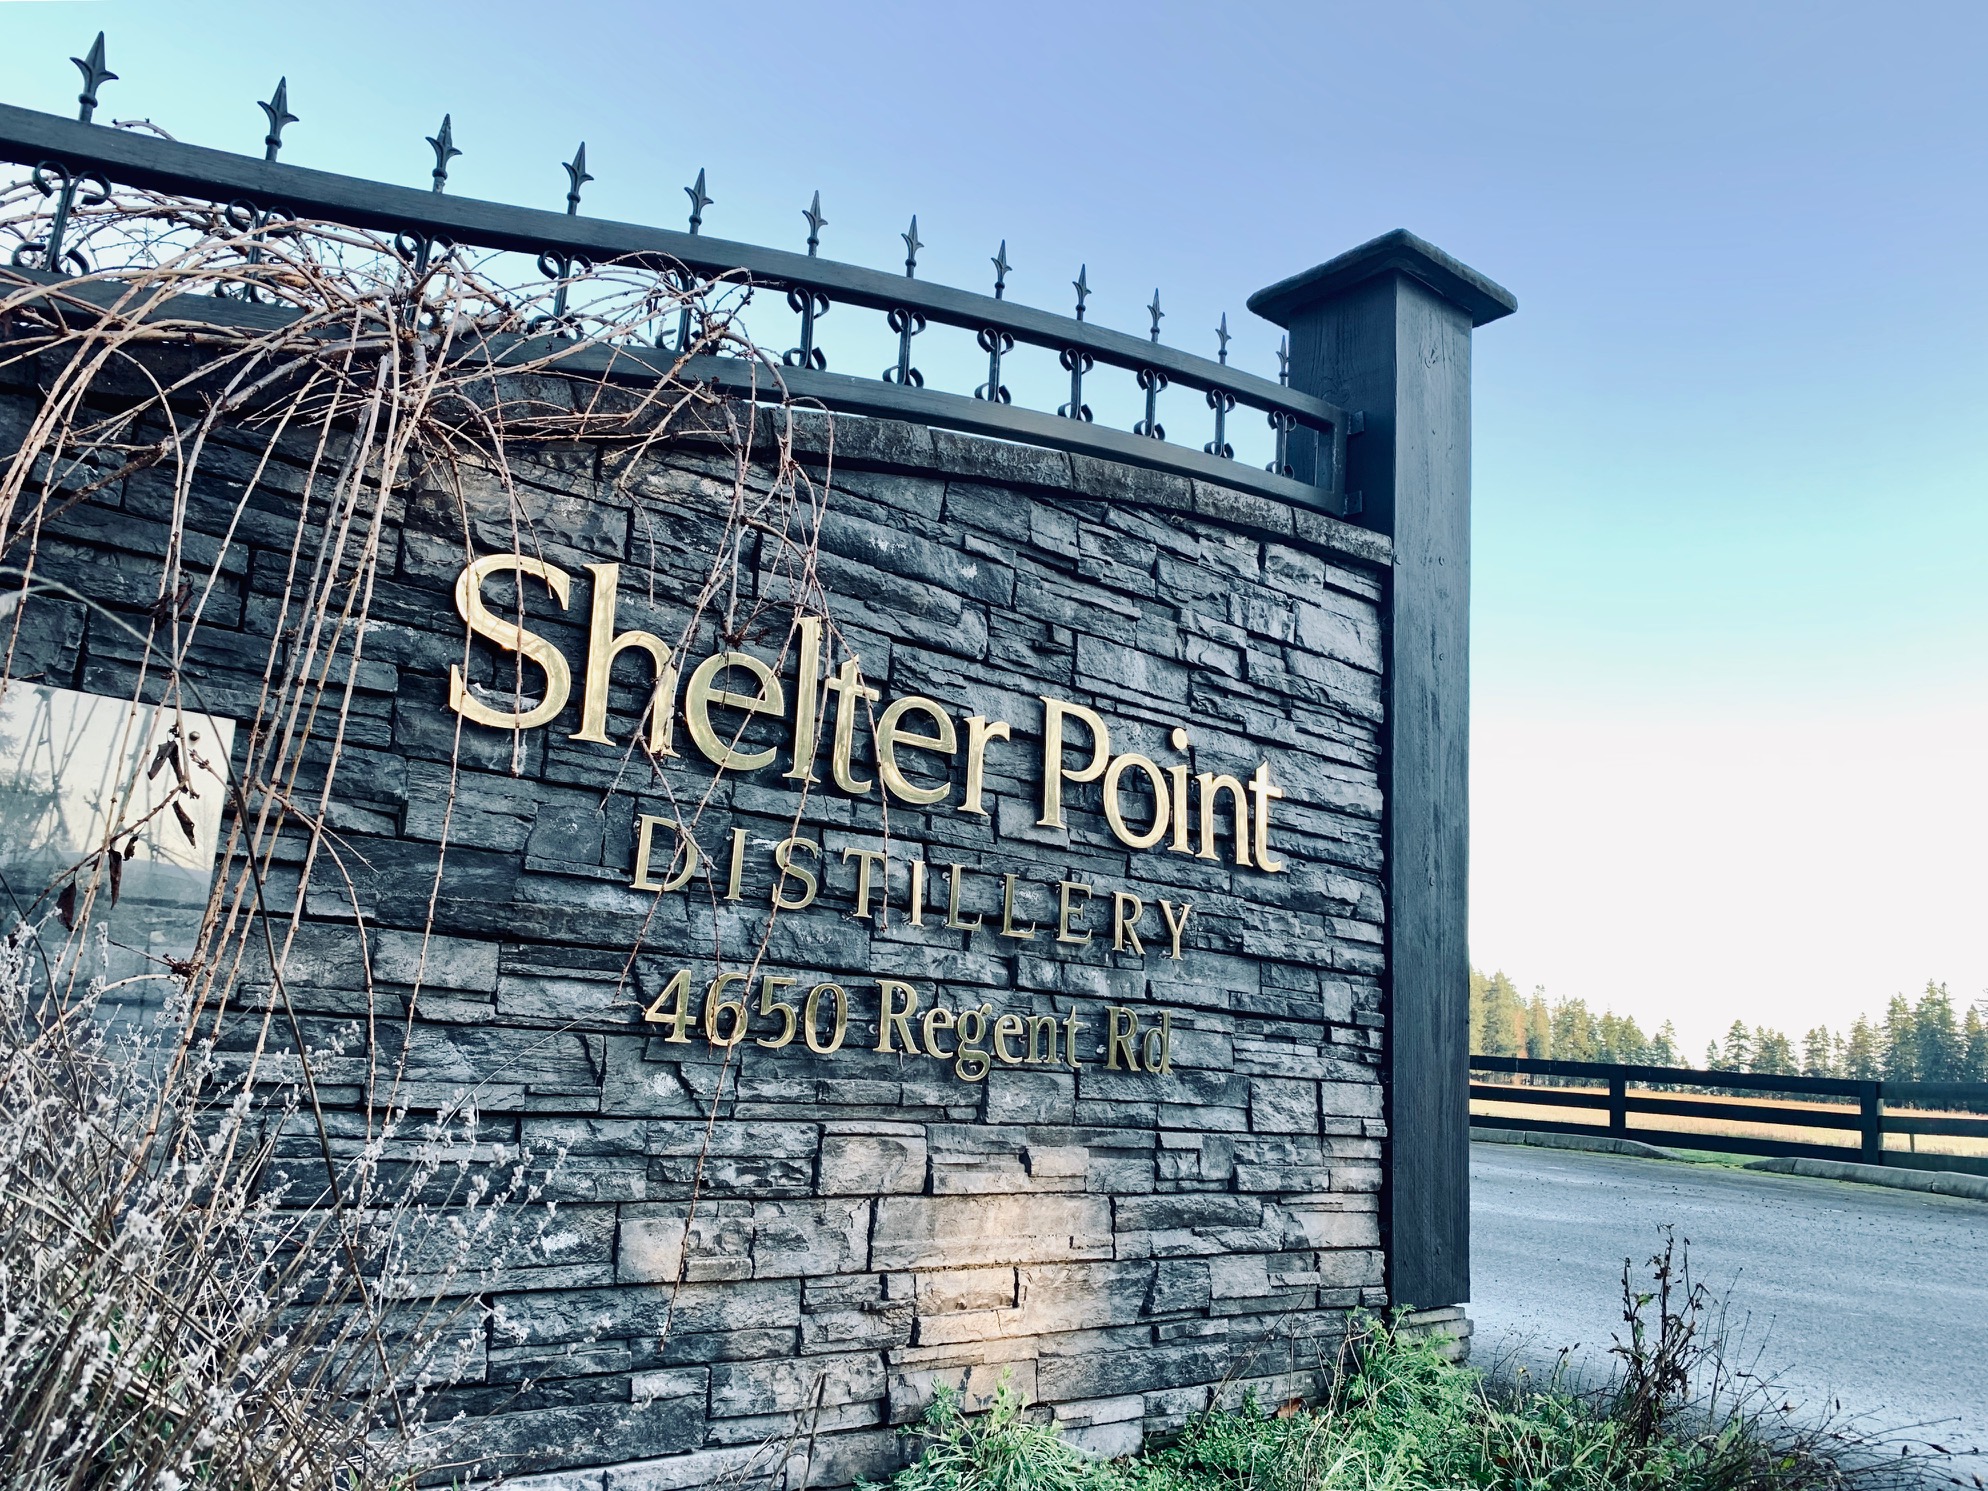 Shelter Point Distillery wins big at Canadian Whisky Awards - My Comox Valley Now